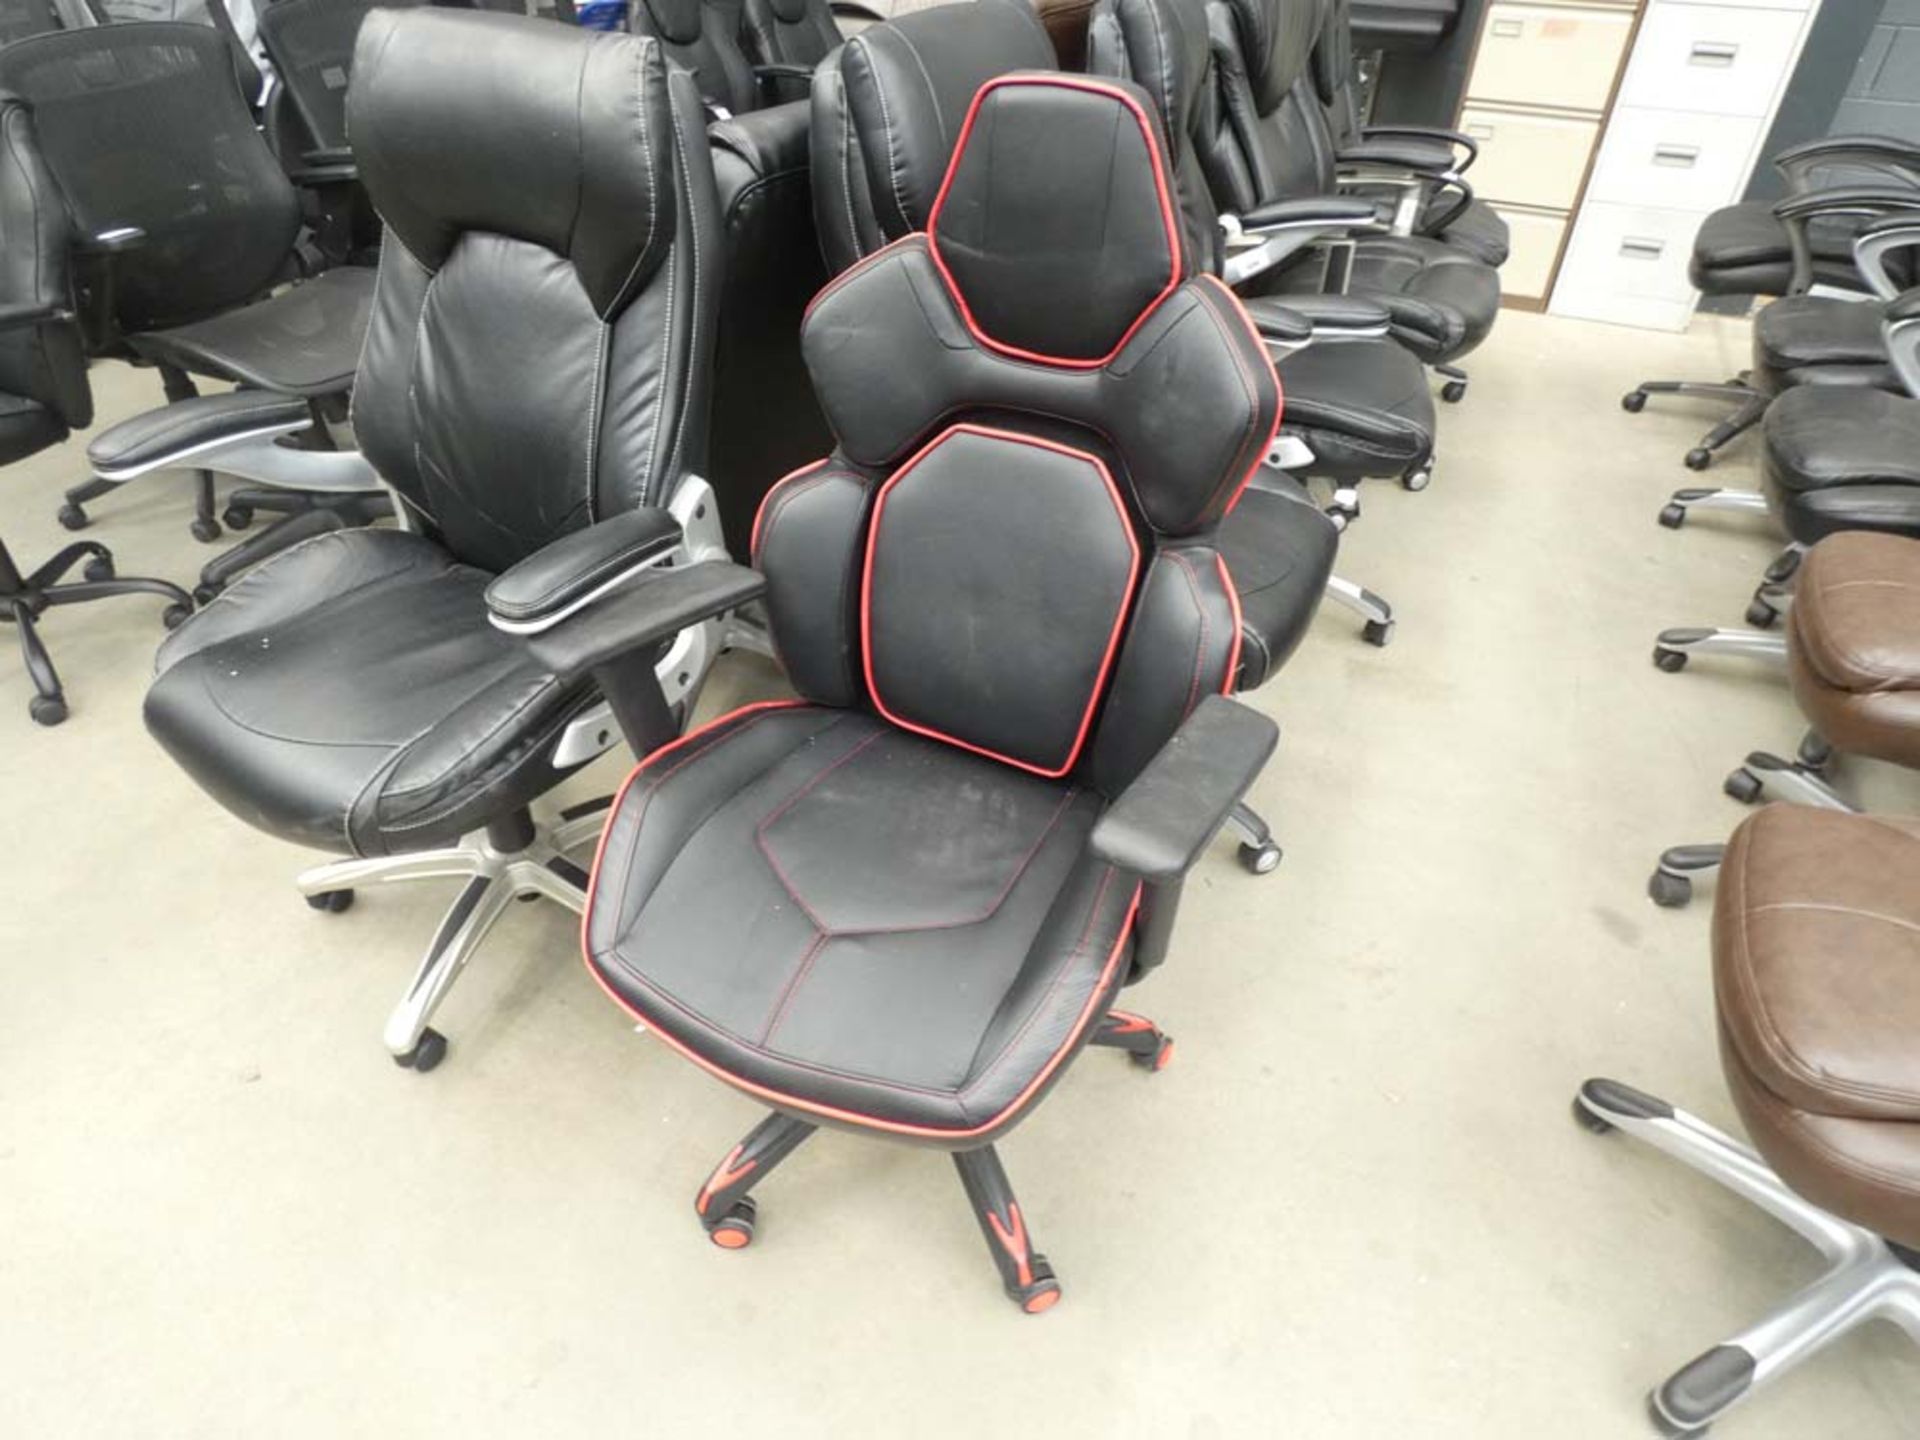 Black and red high backed racing style swivel armchair